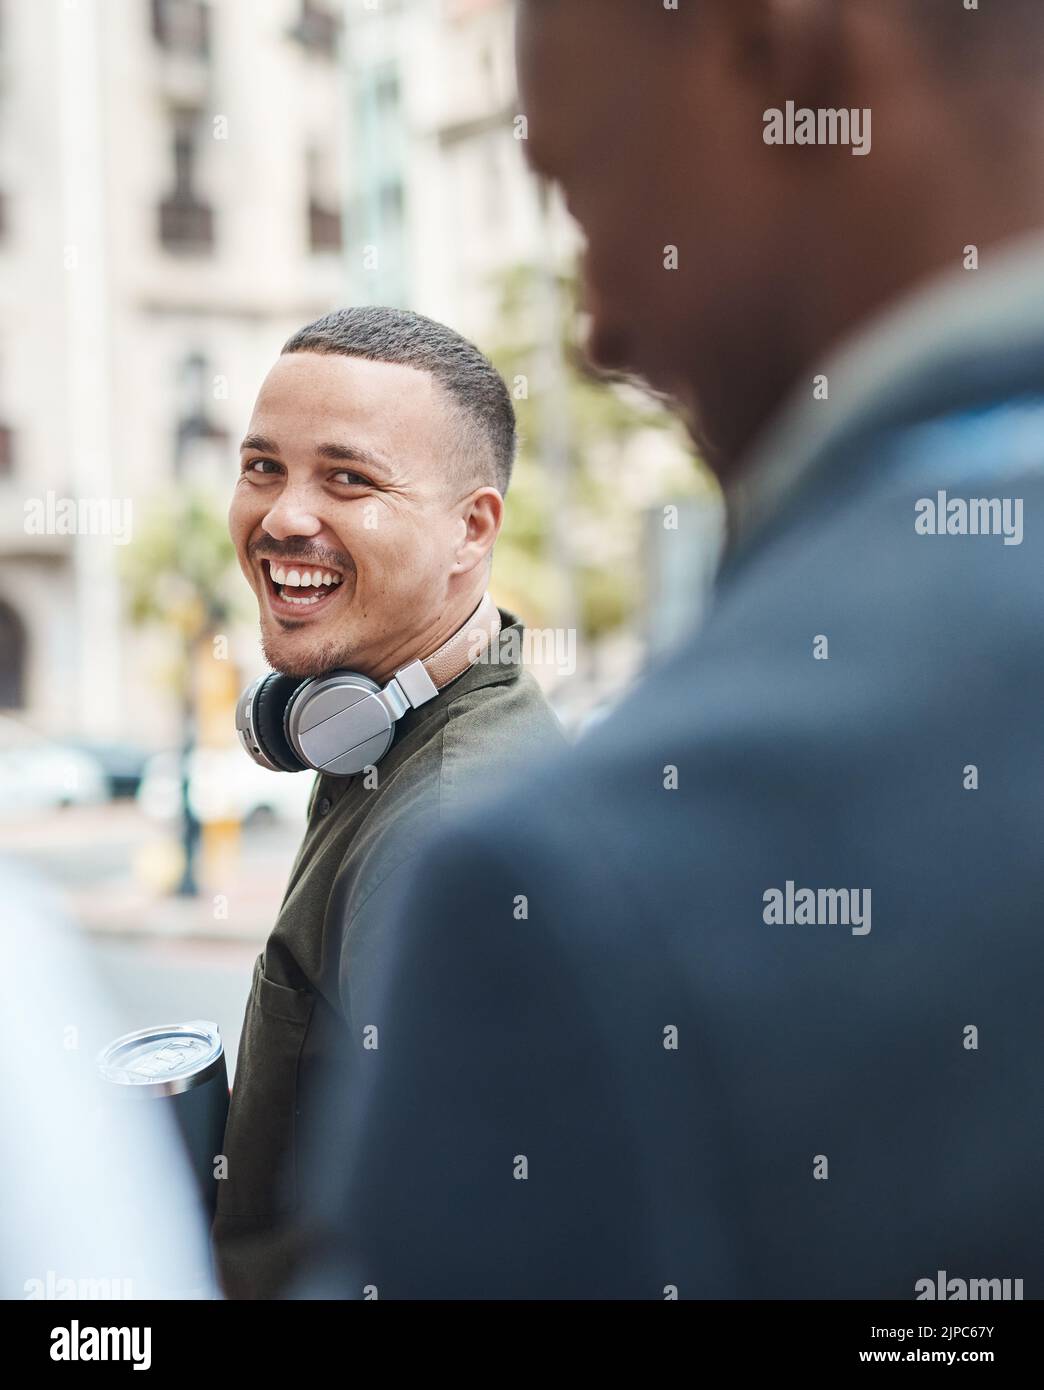 Real life young man portrait in the street with headphones, enjoying music on a playlist app looking happy, stressless and cool. Normal face of a Stock Photo